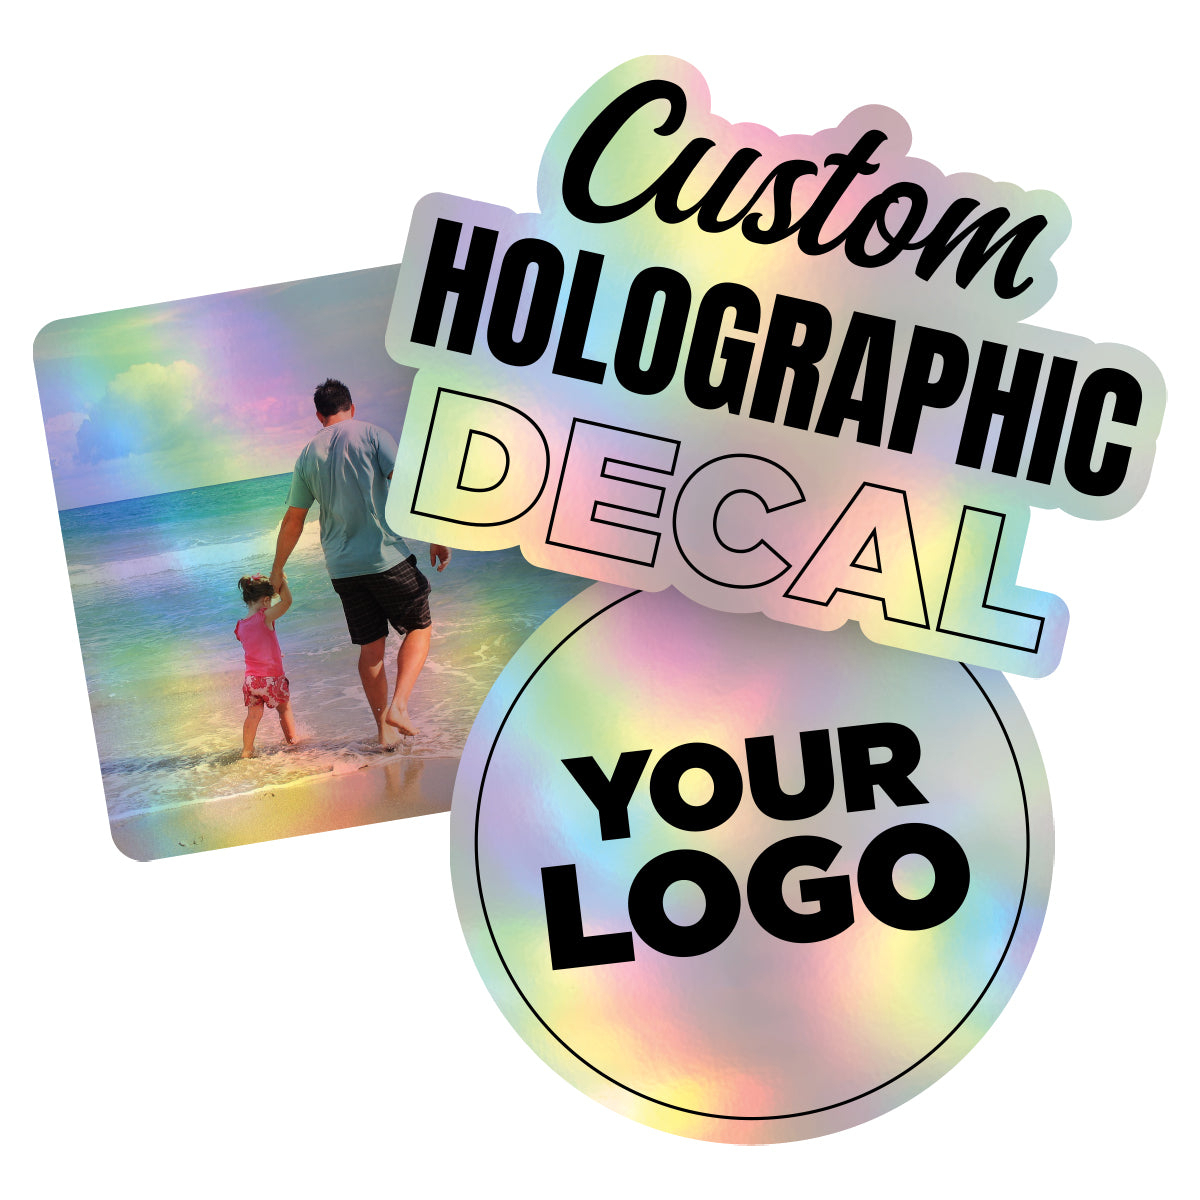 Personalized Holographic Vinyl Sticker Decal Custom Made Any Logo, Image, Text, Or Name Die Cut To Shape - Single, 2 Inch, Square